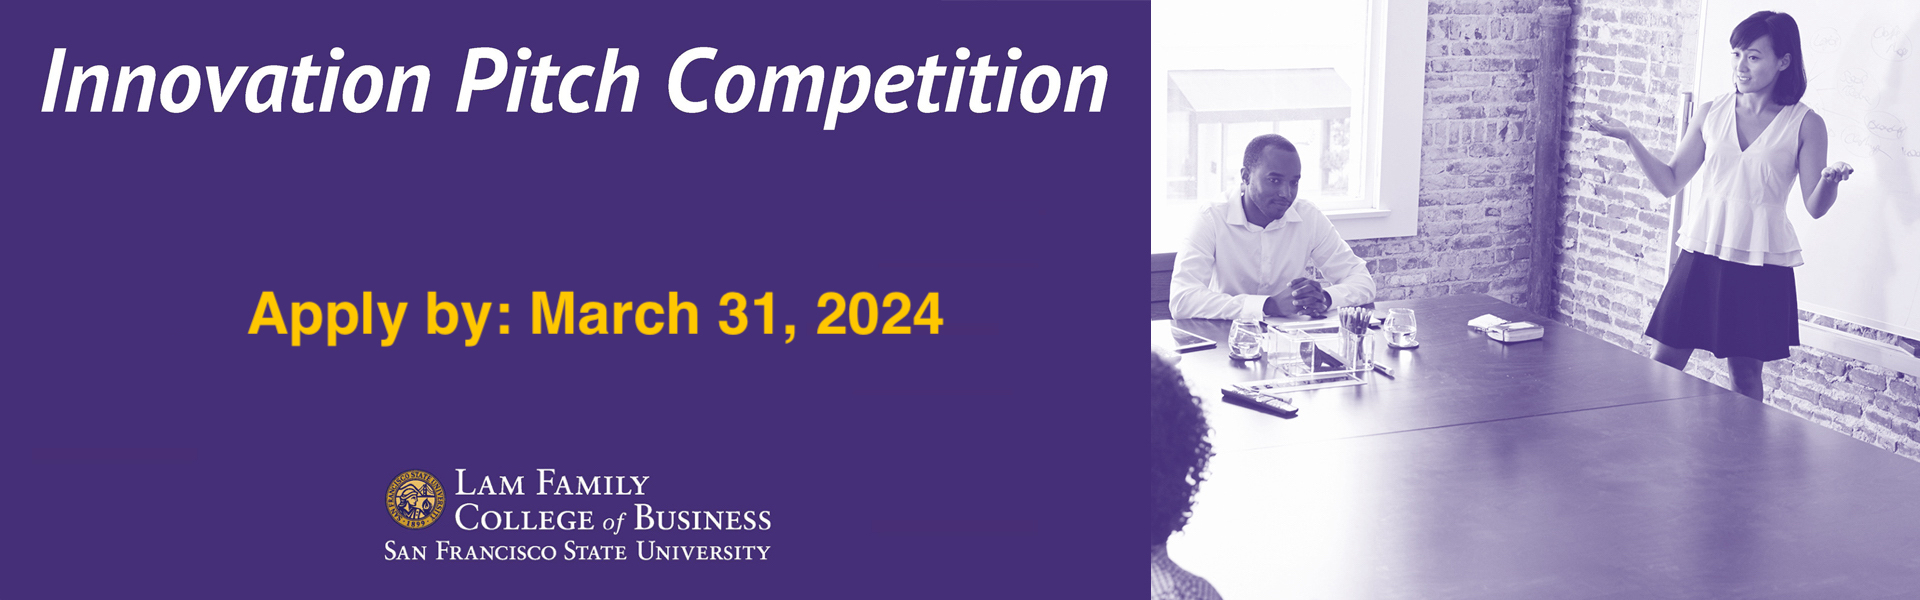 Innovation Pitch Competition Apply by March 31, 2024, woman standing and presenting in a conference in front of group of people sitting at conference table 